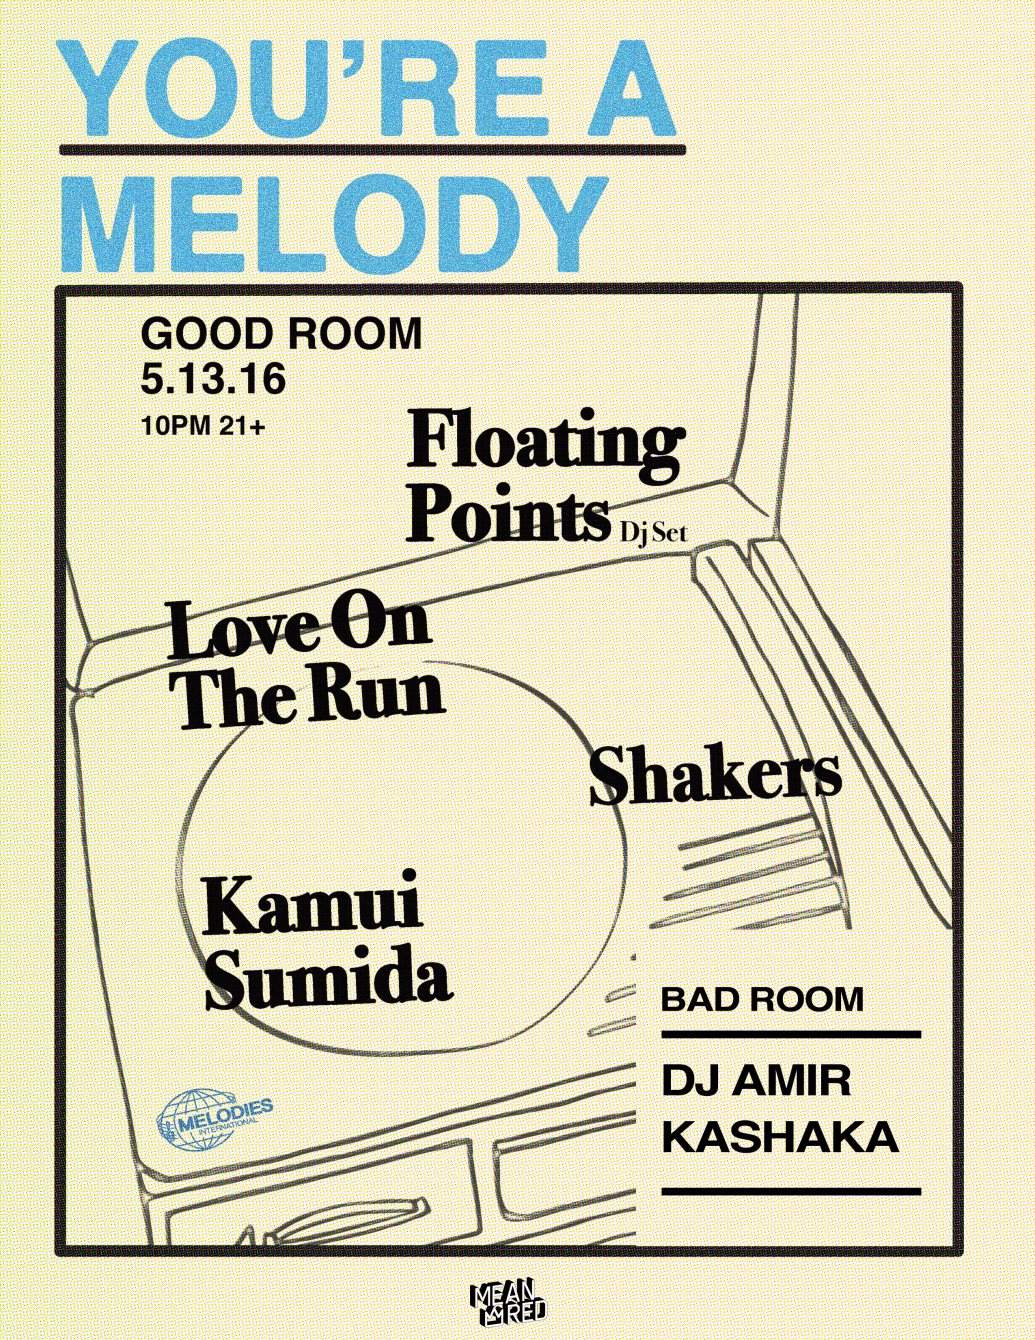 Floating Points (DJ Set), DJ Love On The Run, Shakers, Kamui Sumido || You're A Melody - Página frontal